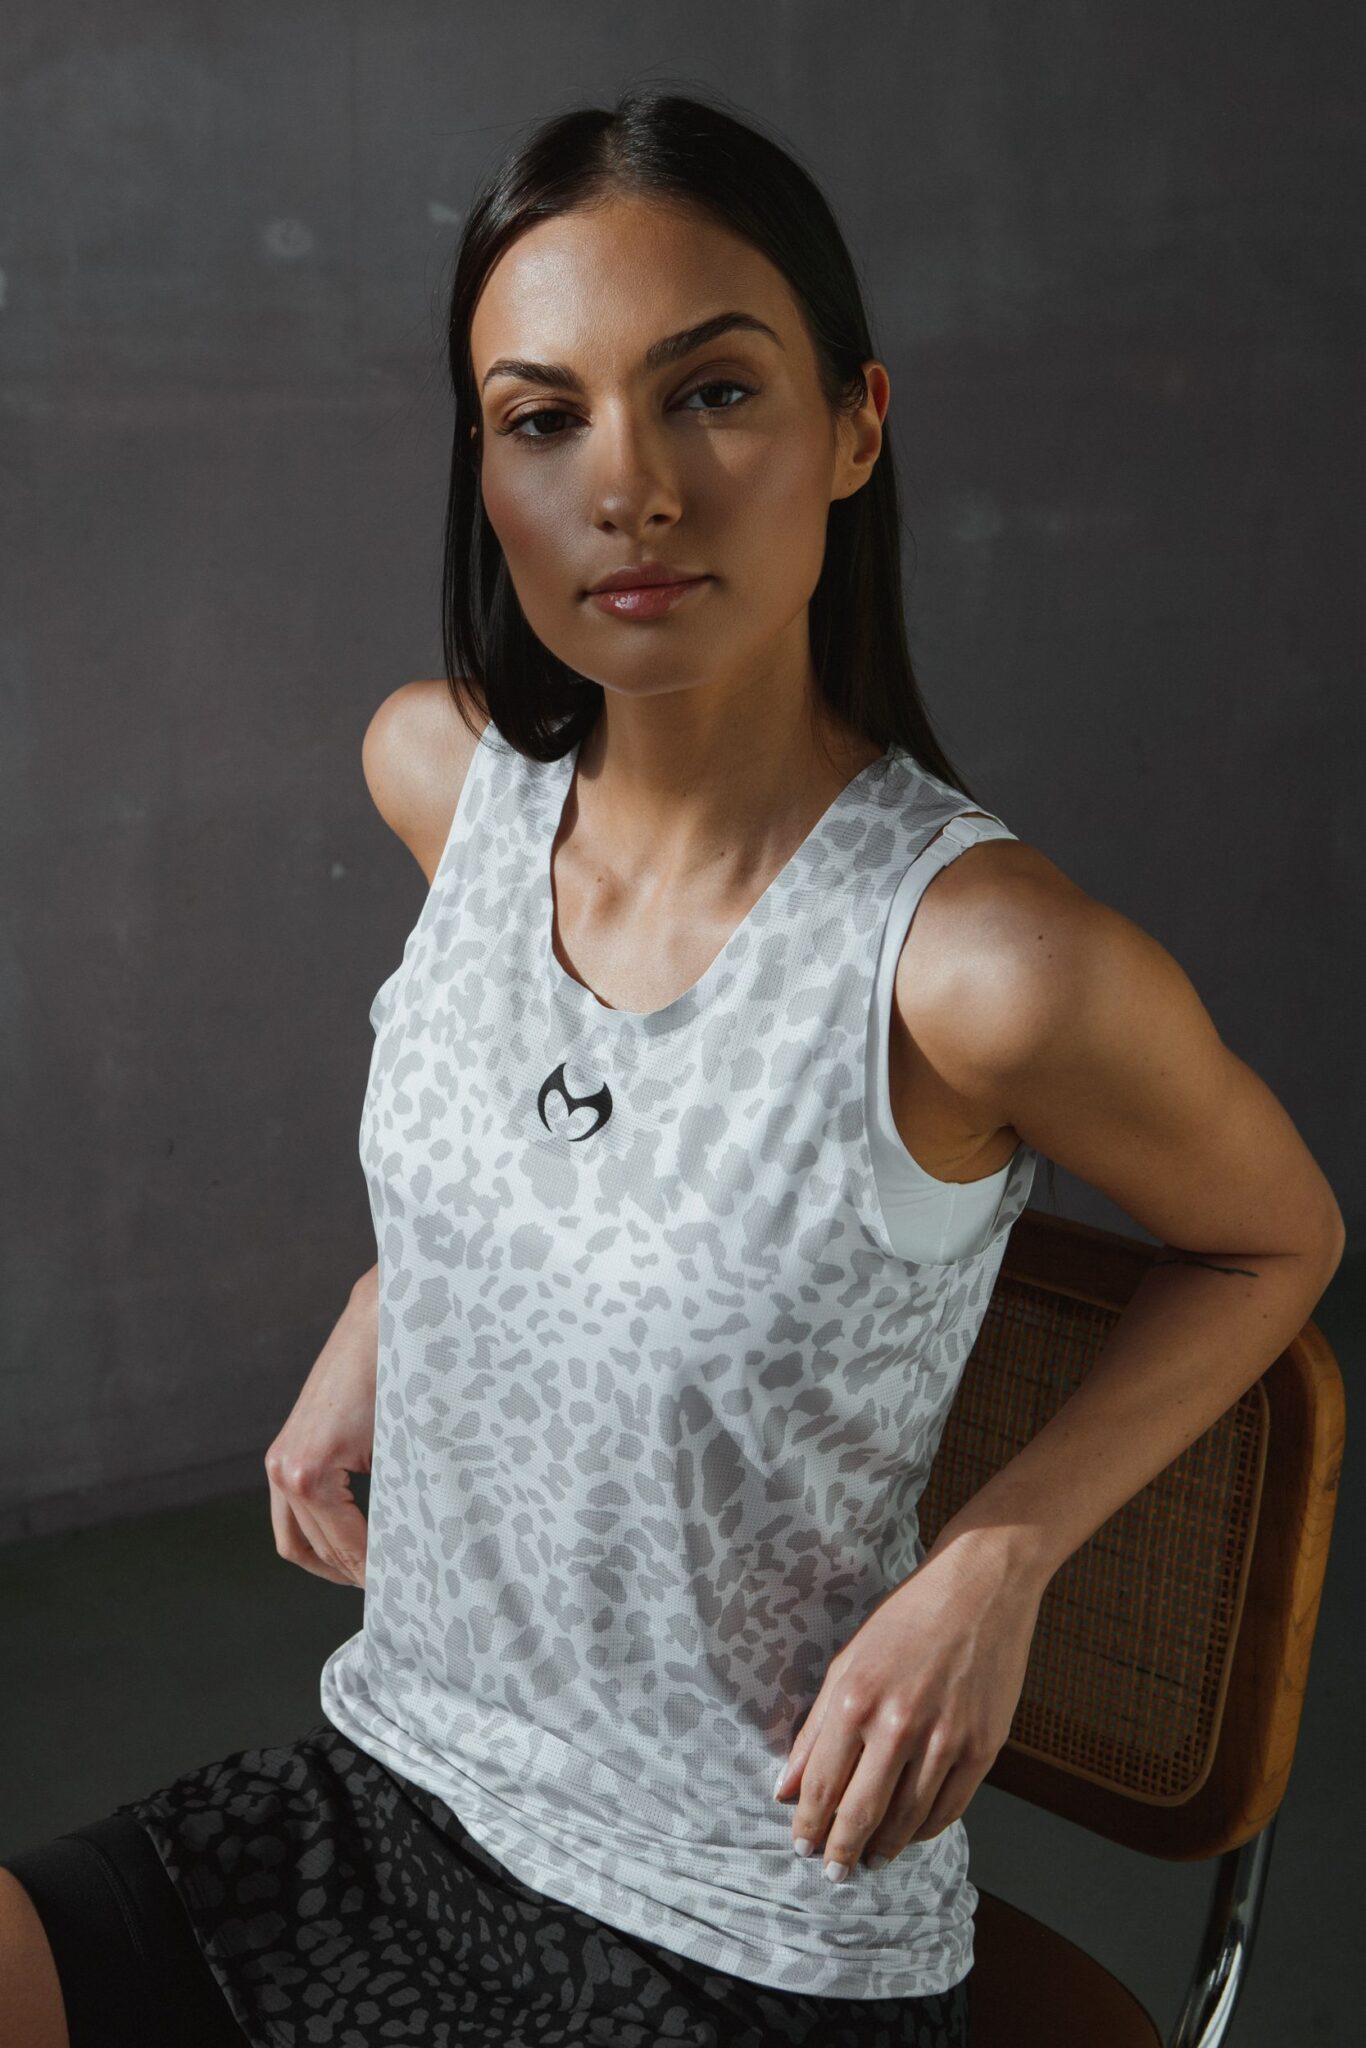 The model presents a collection of sportswear. White and gray T-shirts and black and gray running shorts and skirts.